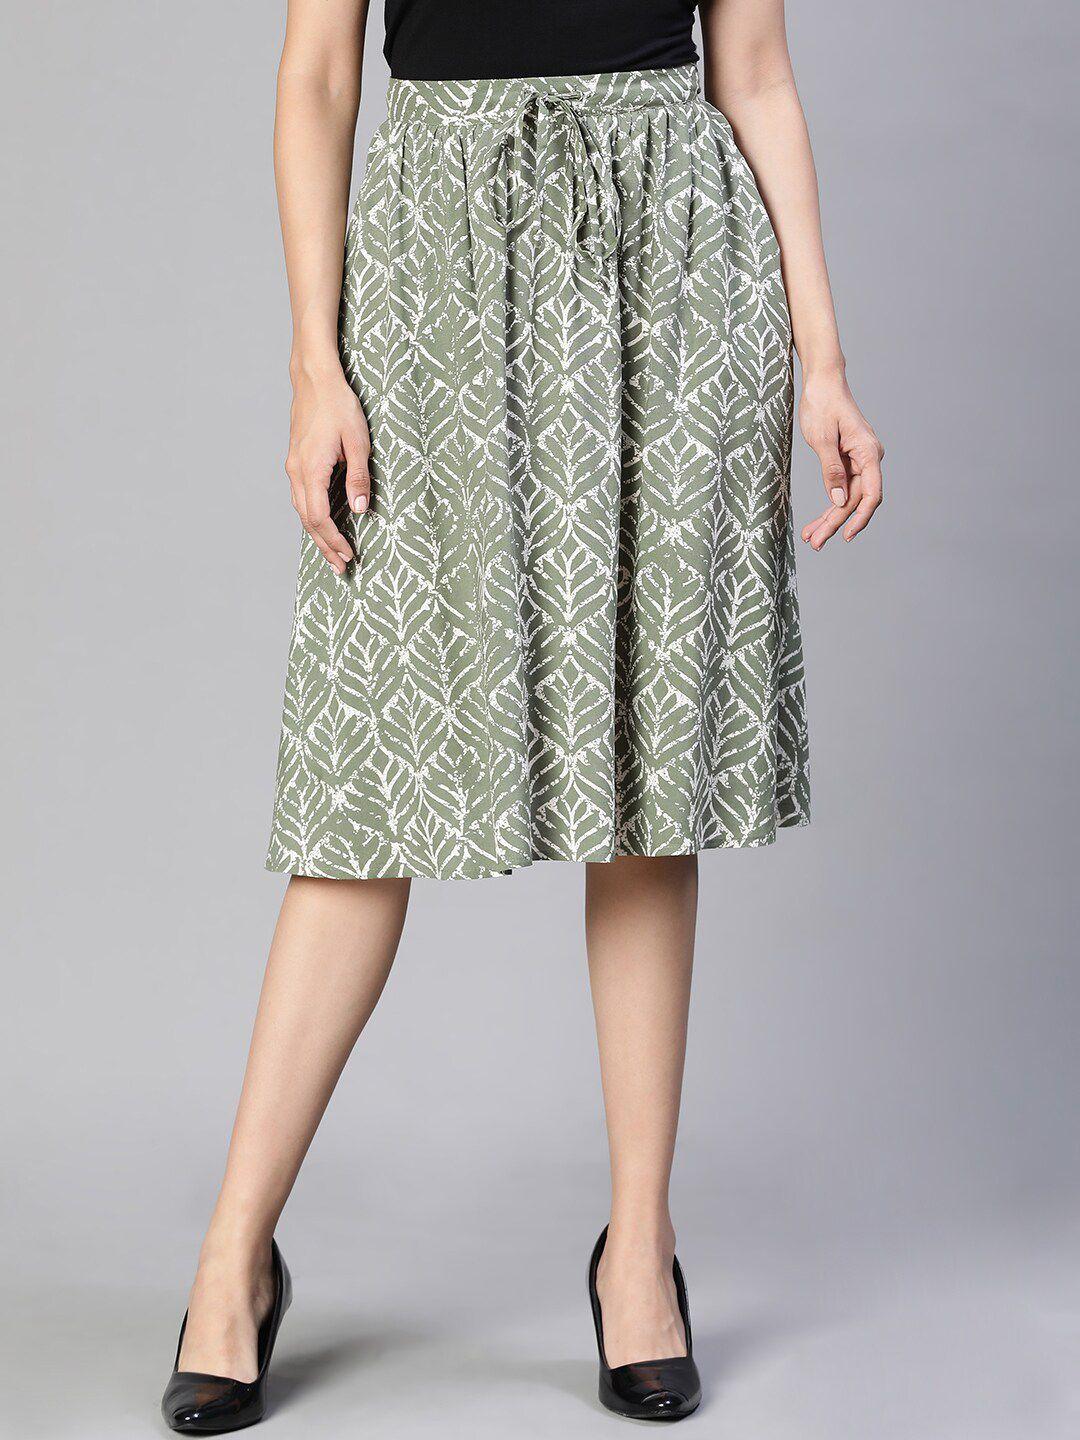 oxolloxo ethnic motifs printed pleated flared skirt